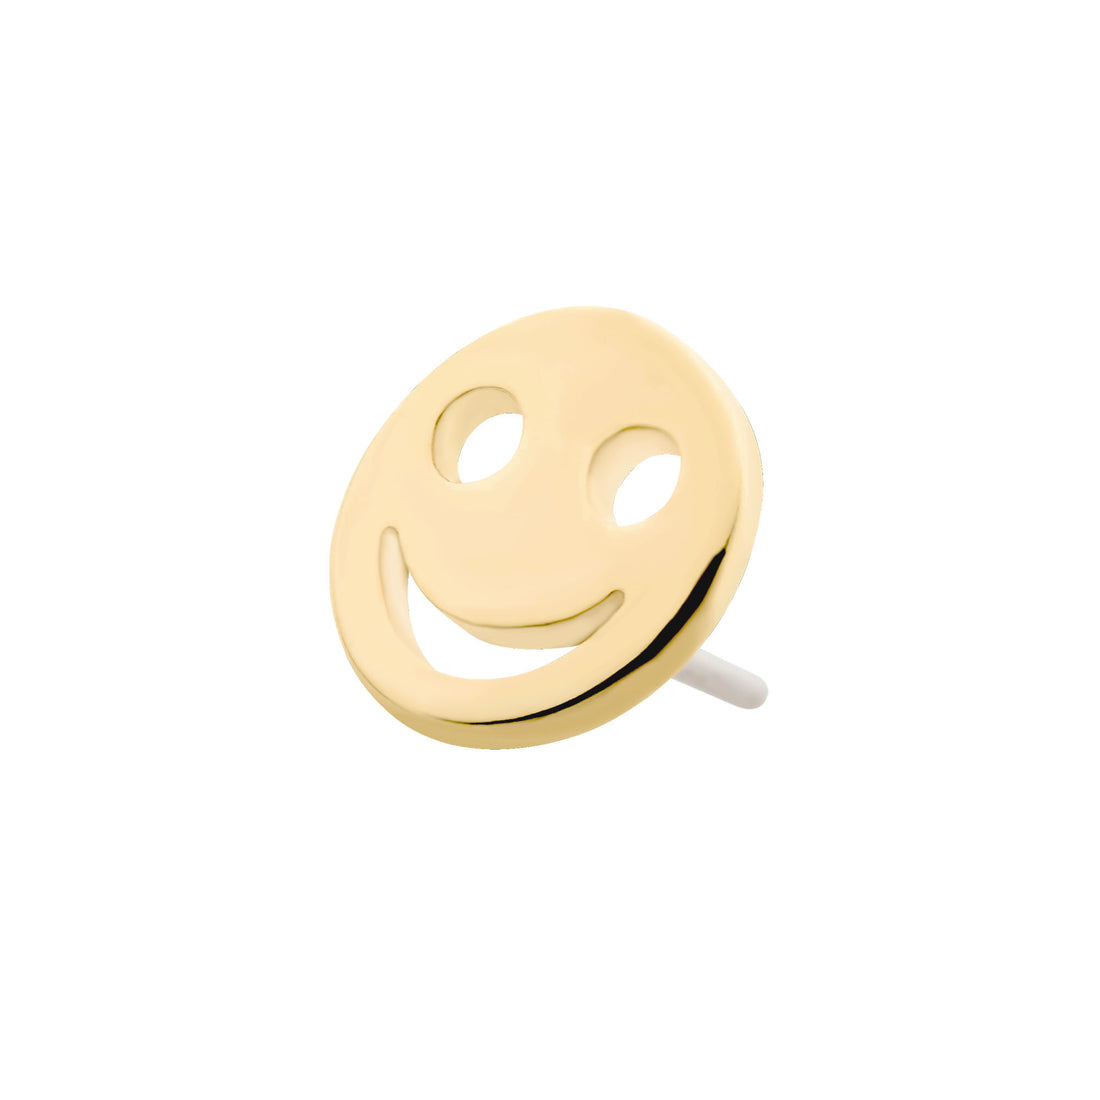 14kt Gold Threadless Cut Out Smiley Face Emoji Top